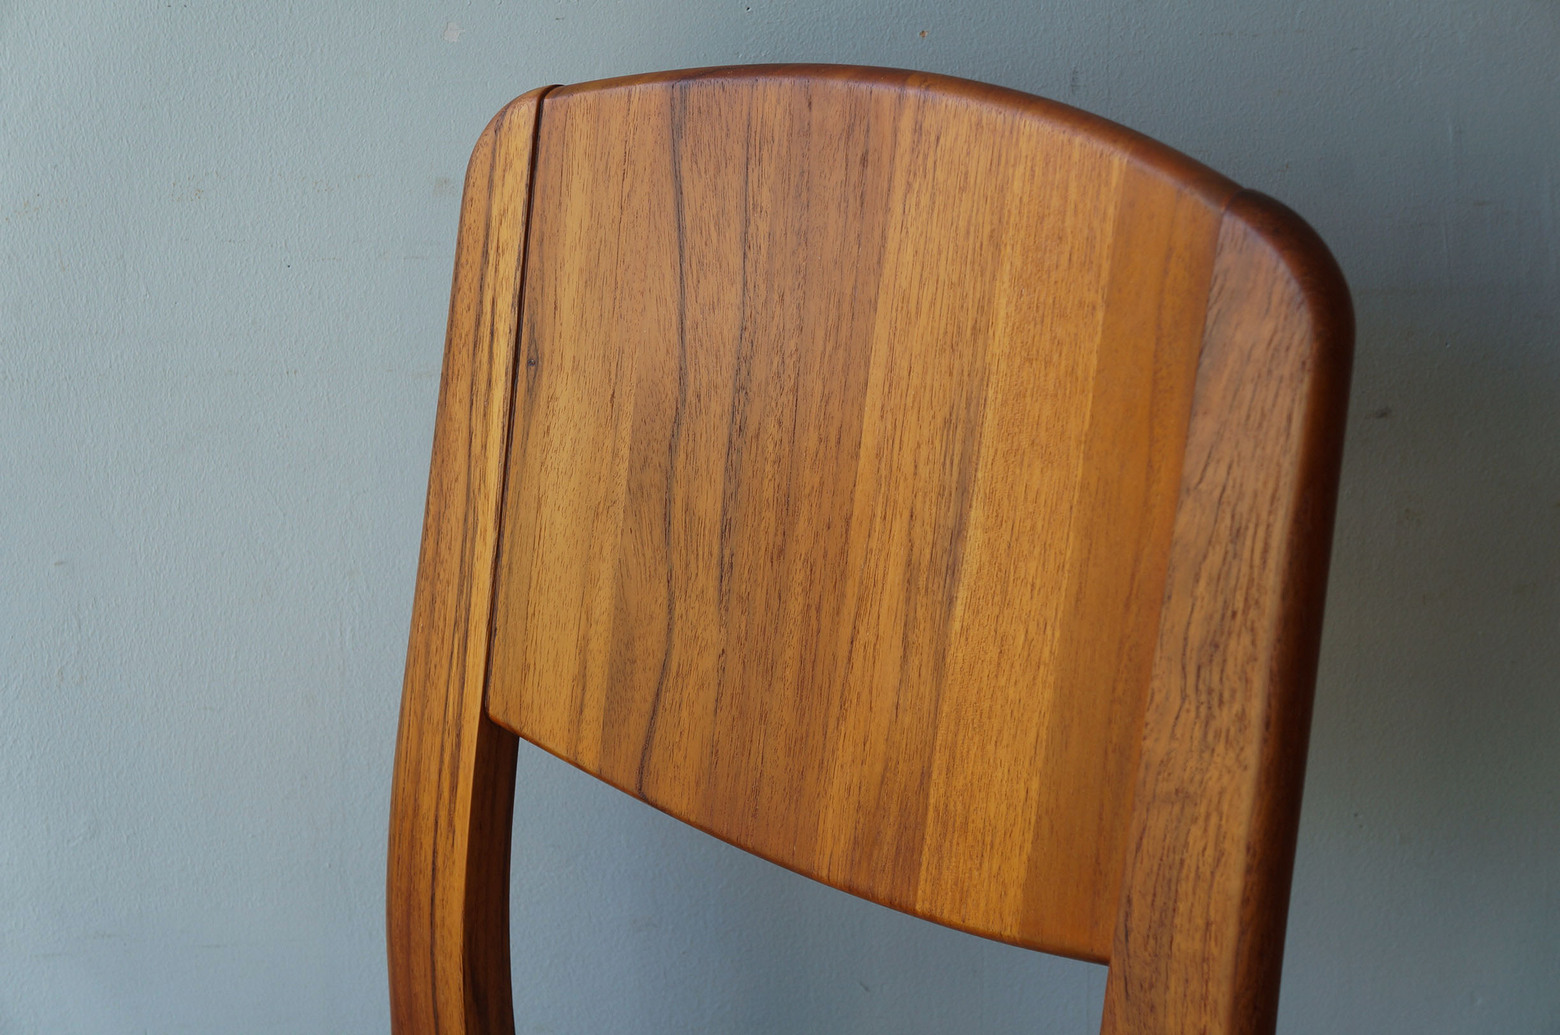 Danish Vintage Dining Chair Koefoeds Hornslet/デンマークヴィンテージ ダイニングチェア コフォード ホーンスレット 椅子 チーク材 北欧モダン 1